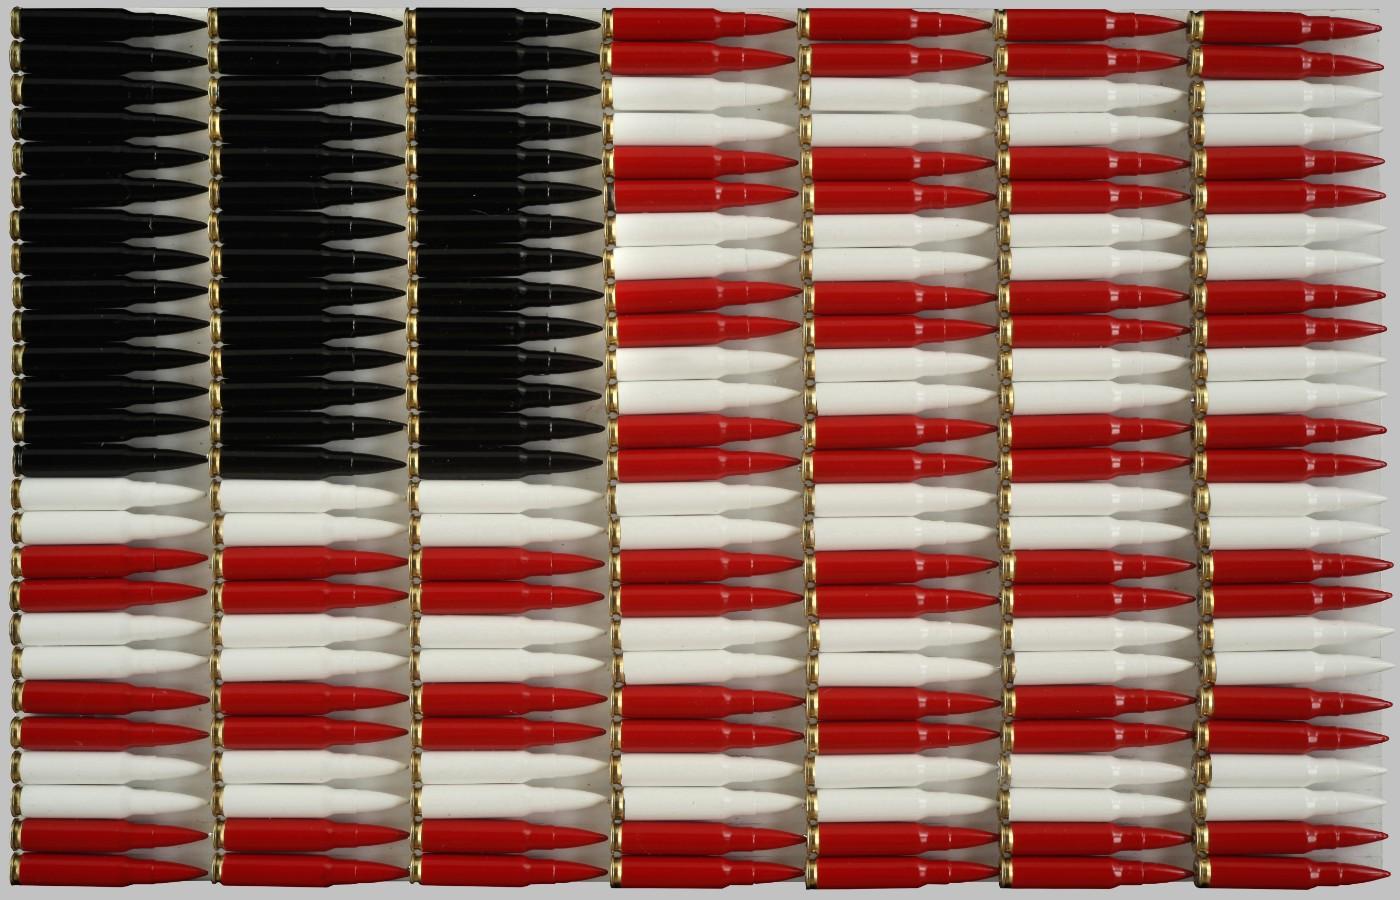 Michele Pred, Red White and Black, 2016